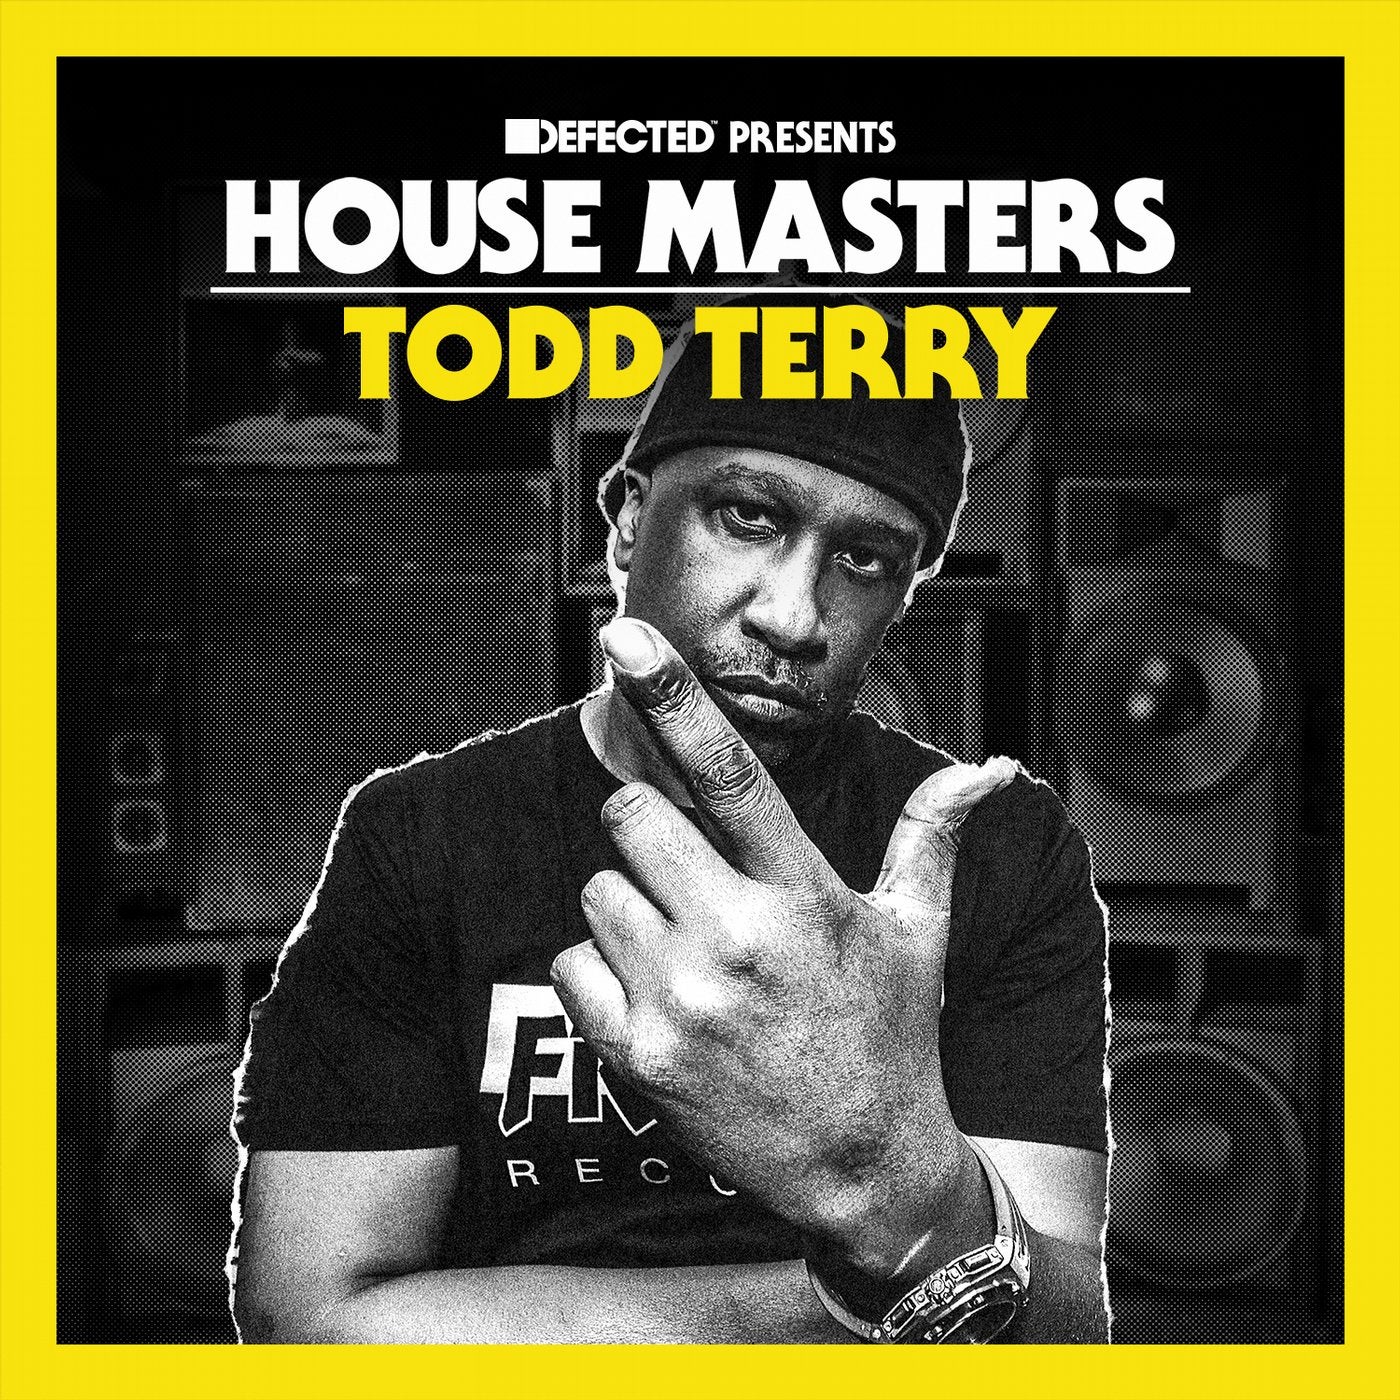 Defected presents House Masters - Todd Terry